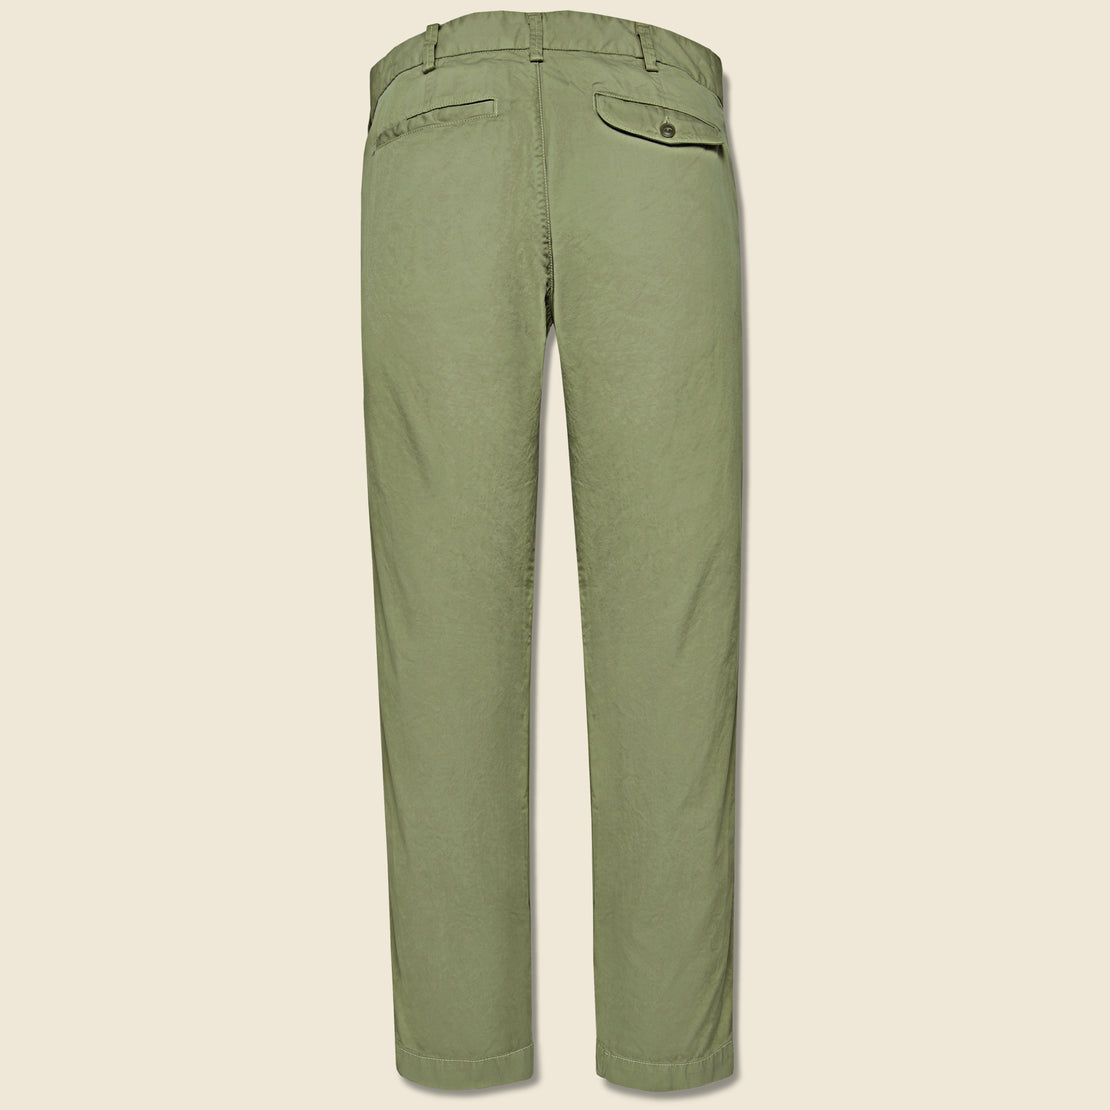 Light Twill Trouser - Fatigue - Save Khaki - STAG Provisions - Pants - Twill